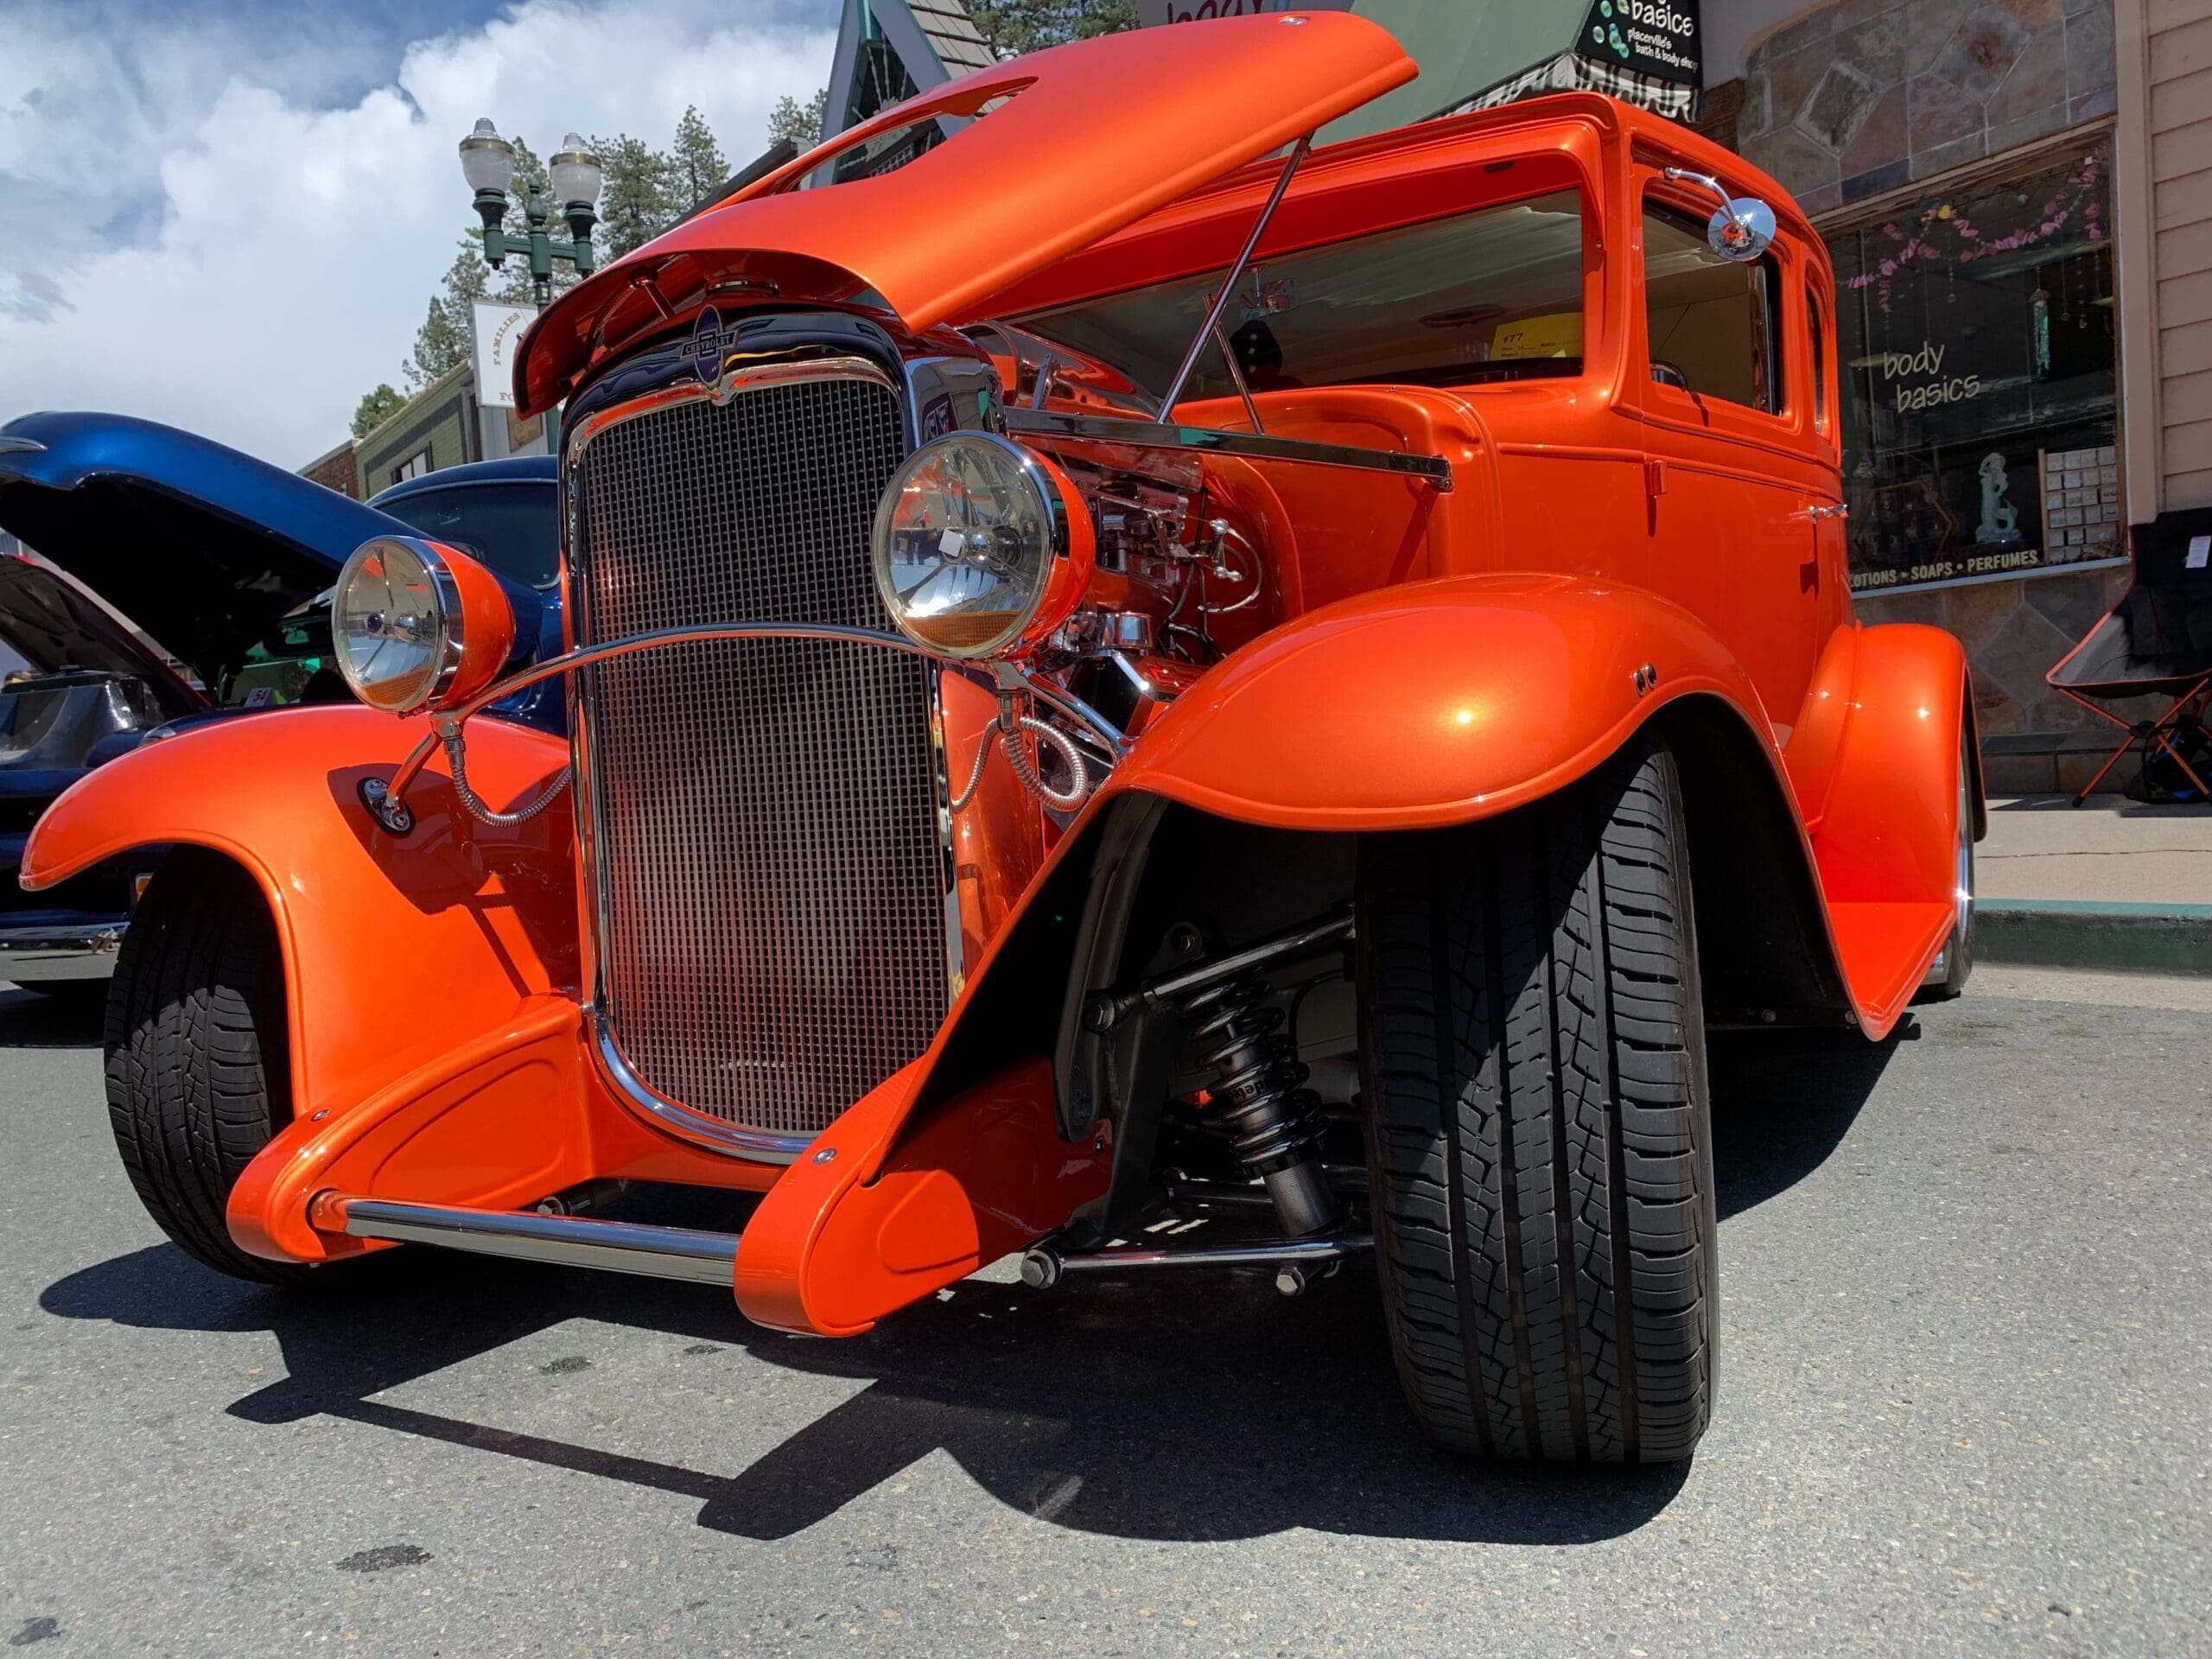 Pigeon Forge Hot Rod Run - Spring Show 2020